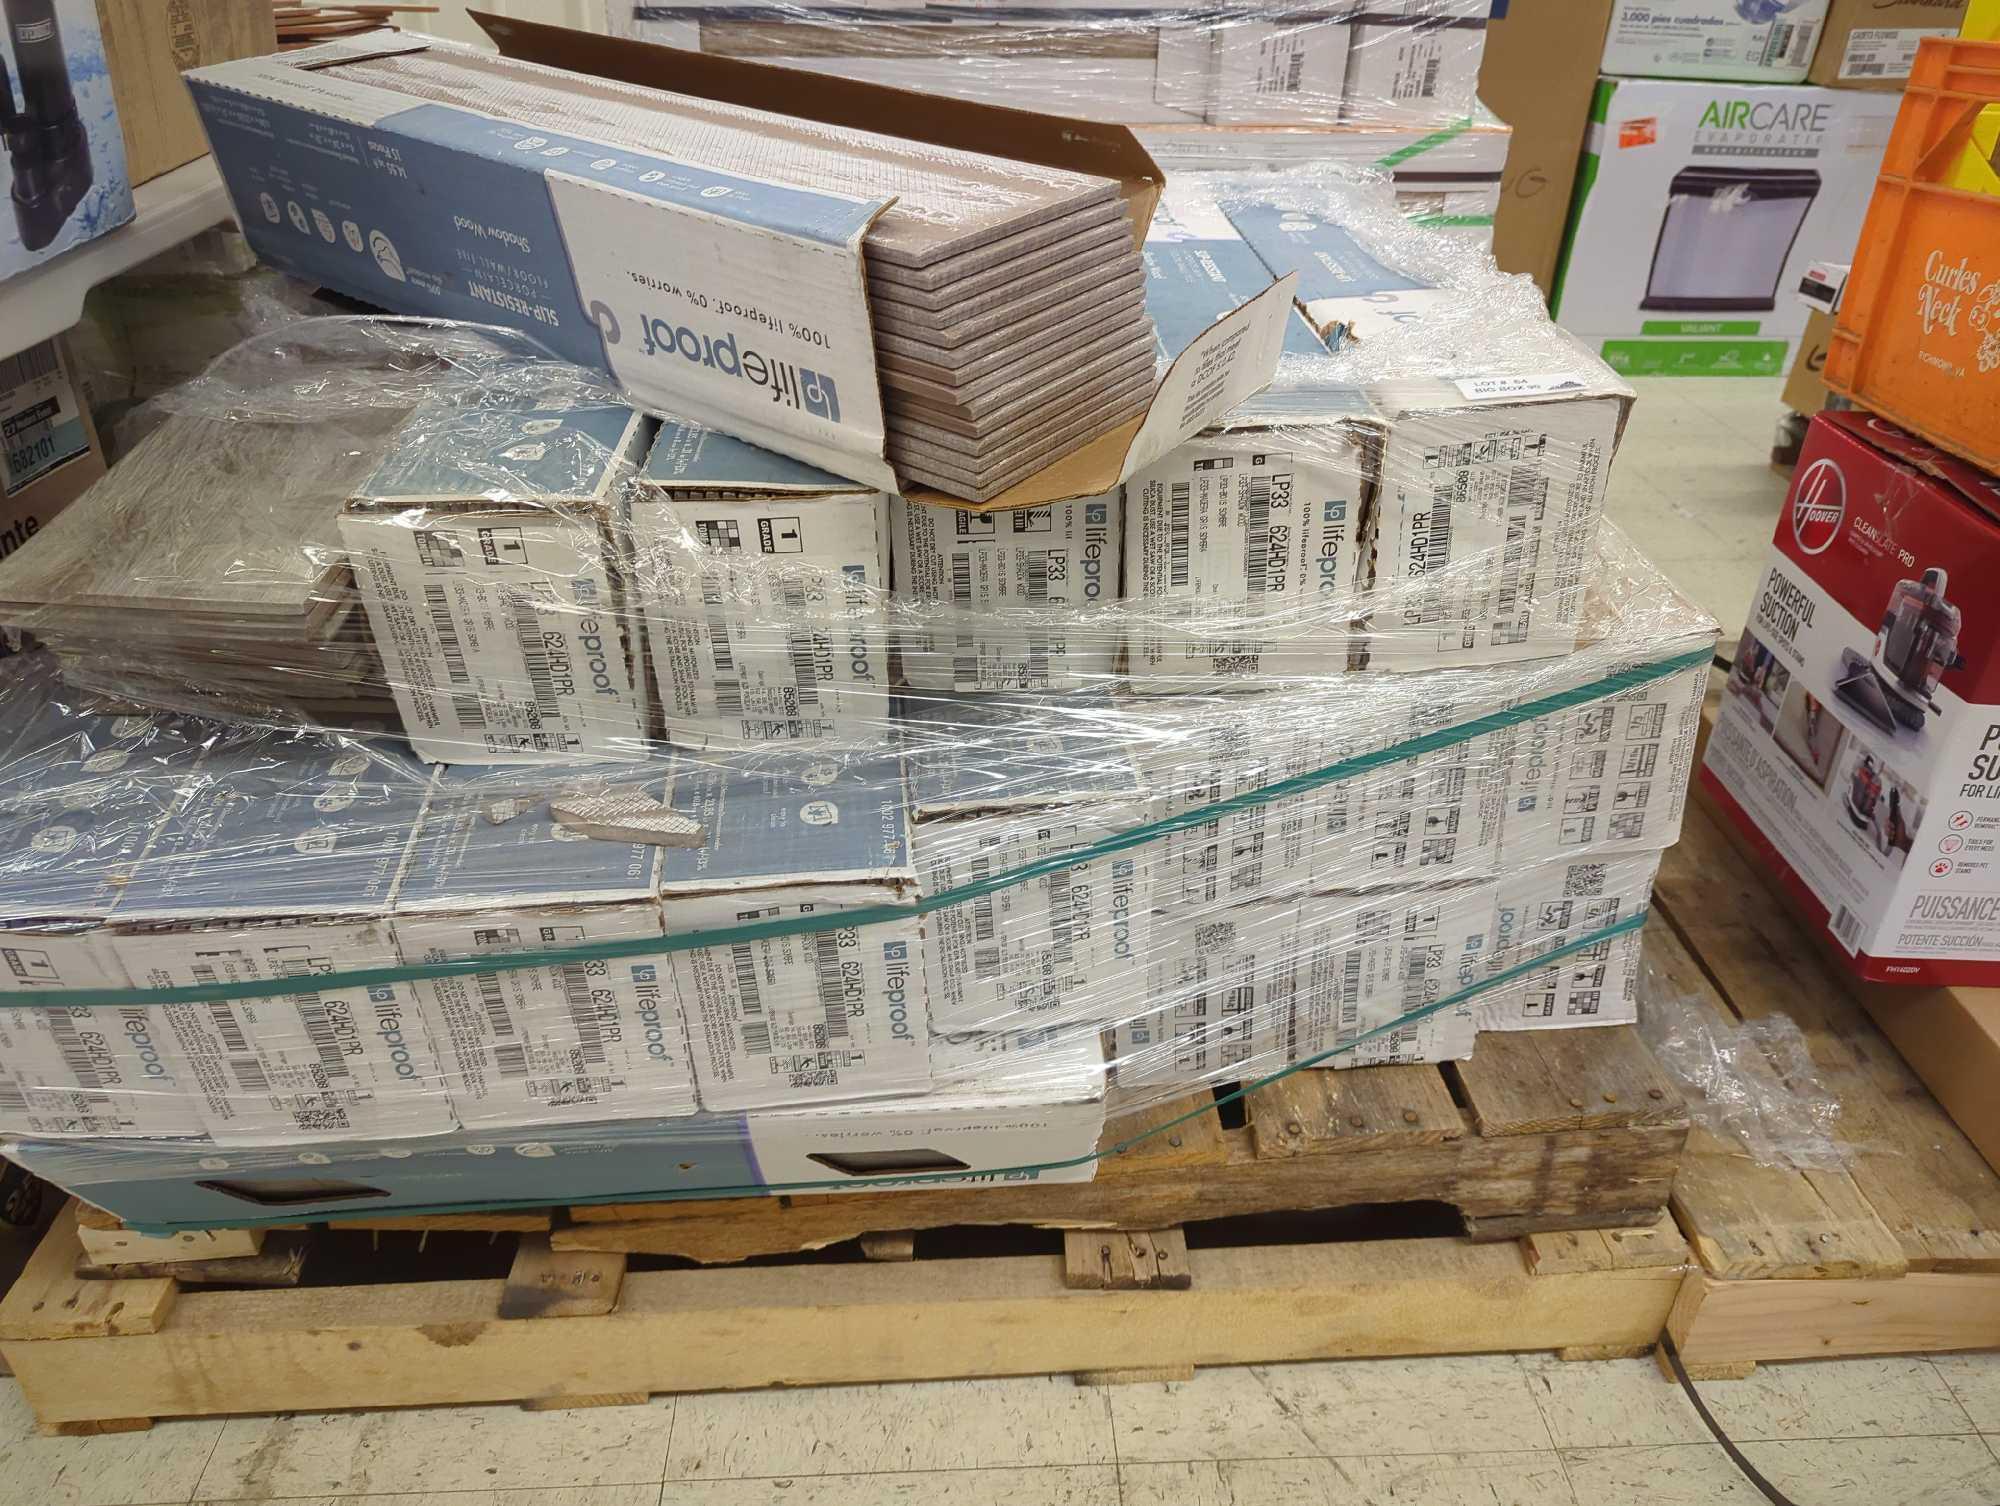 Pallet Lot of Approximately 20 Cases of Lifeproof Shadow Wood 6 in. x 24 in. Porcelain Floor and